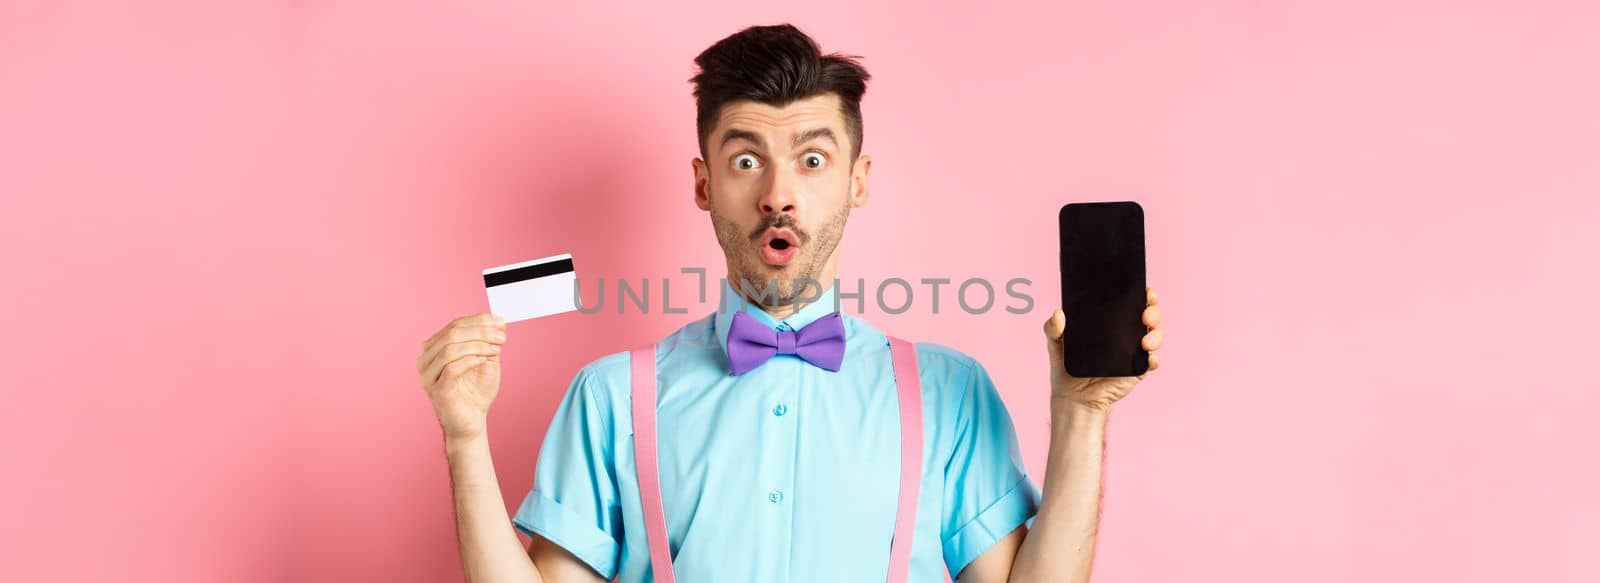 E-commerce and shopping concept. Surprised man showing blank smartphone screen with plastic credit card, standing amazed on pink background.